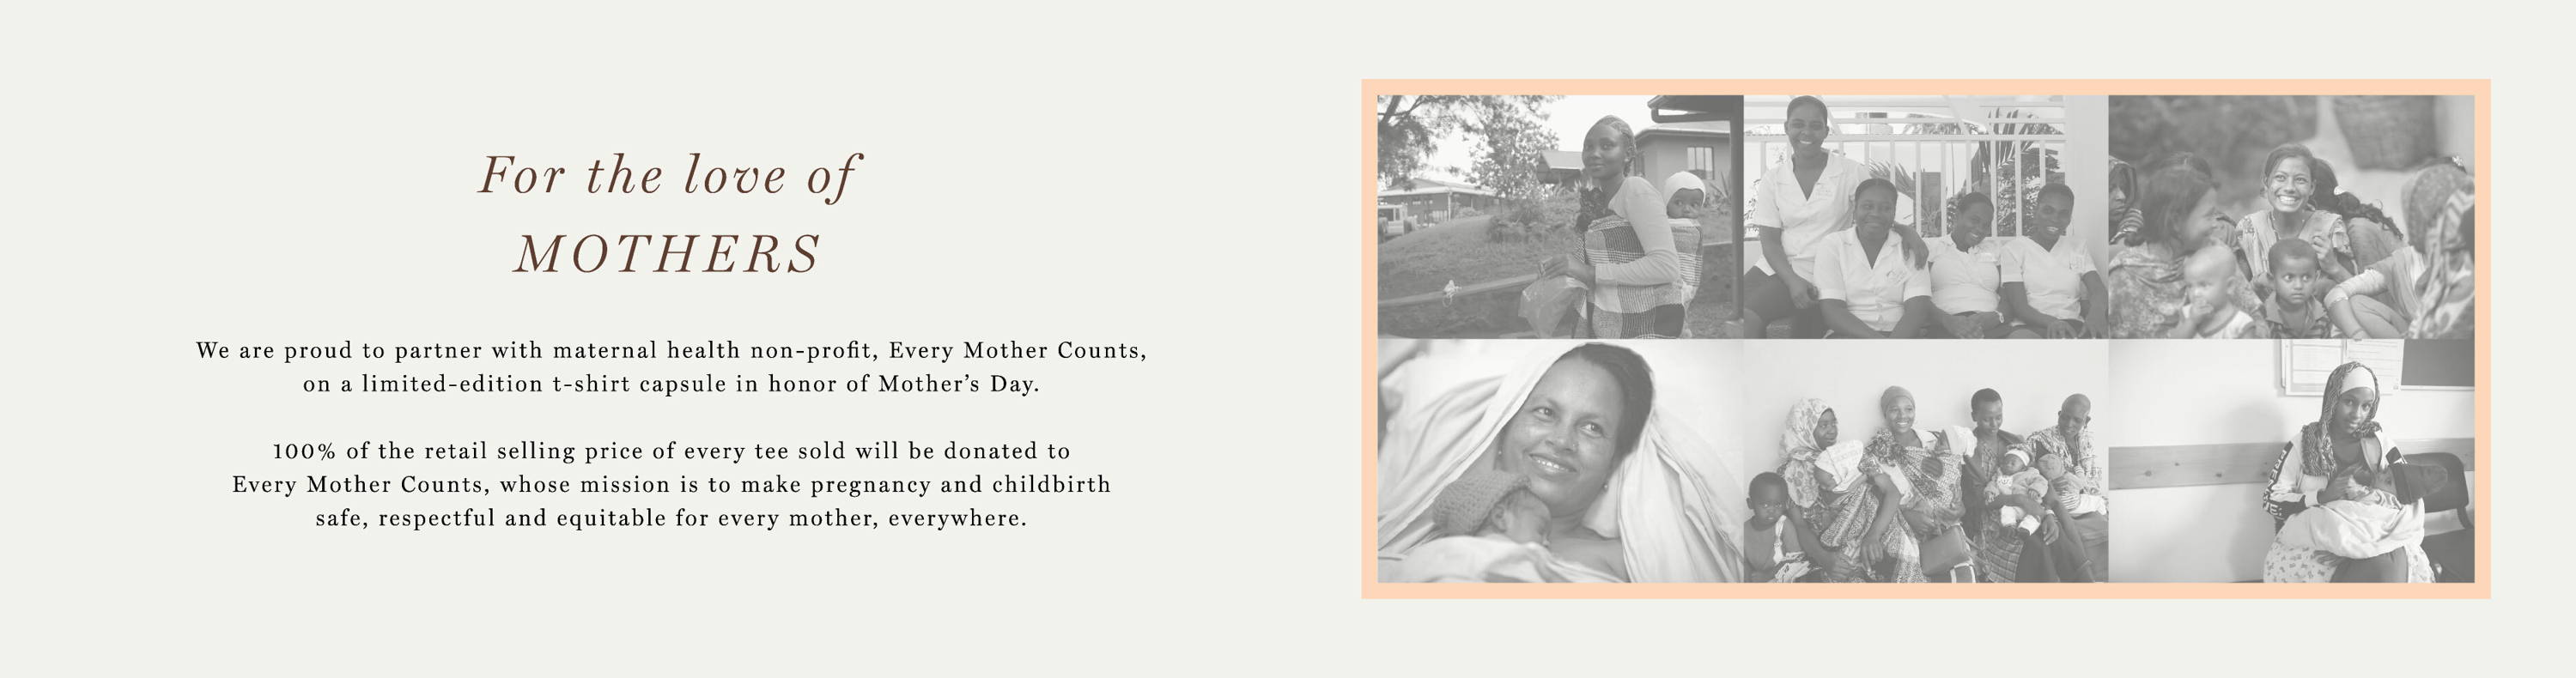 For the Love of Mothers - Every Mother Counts Campaign